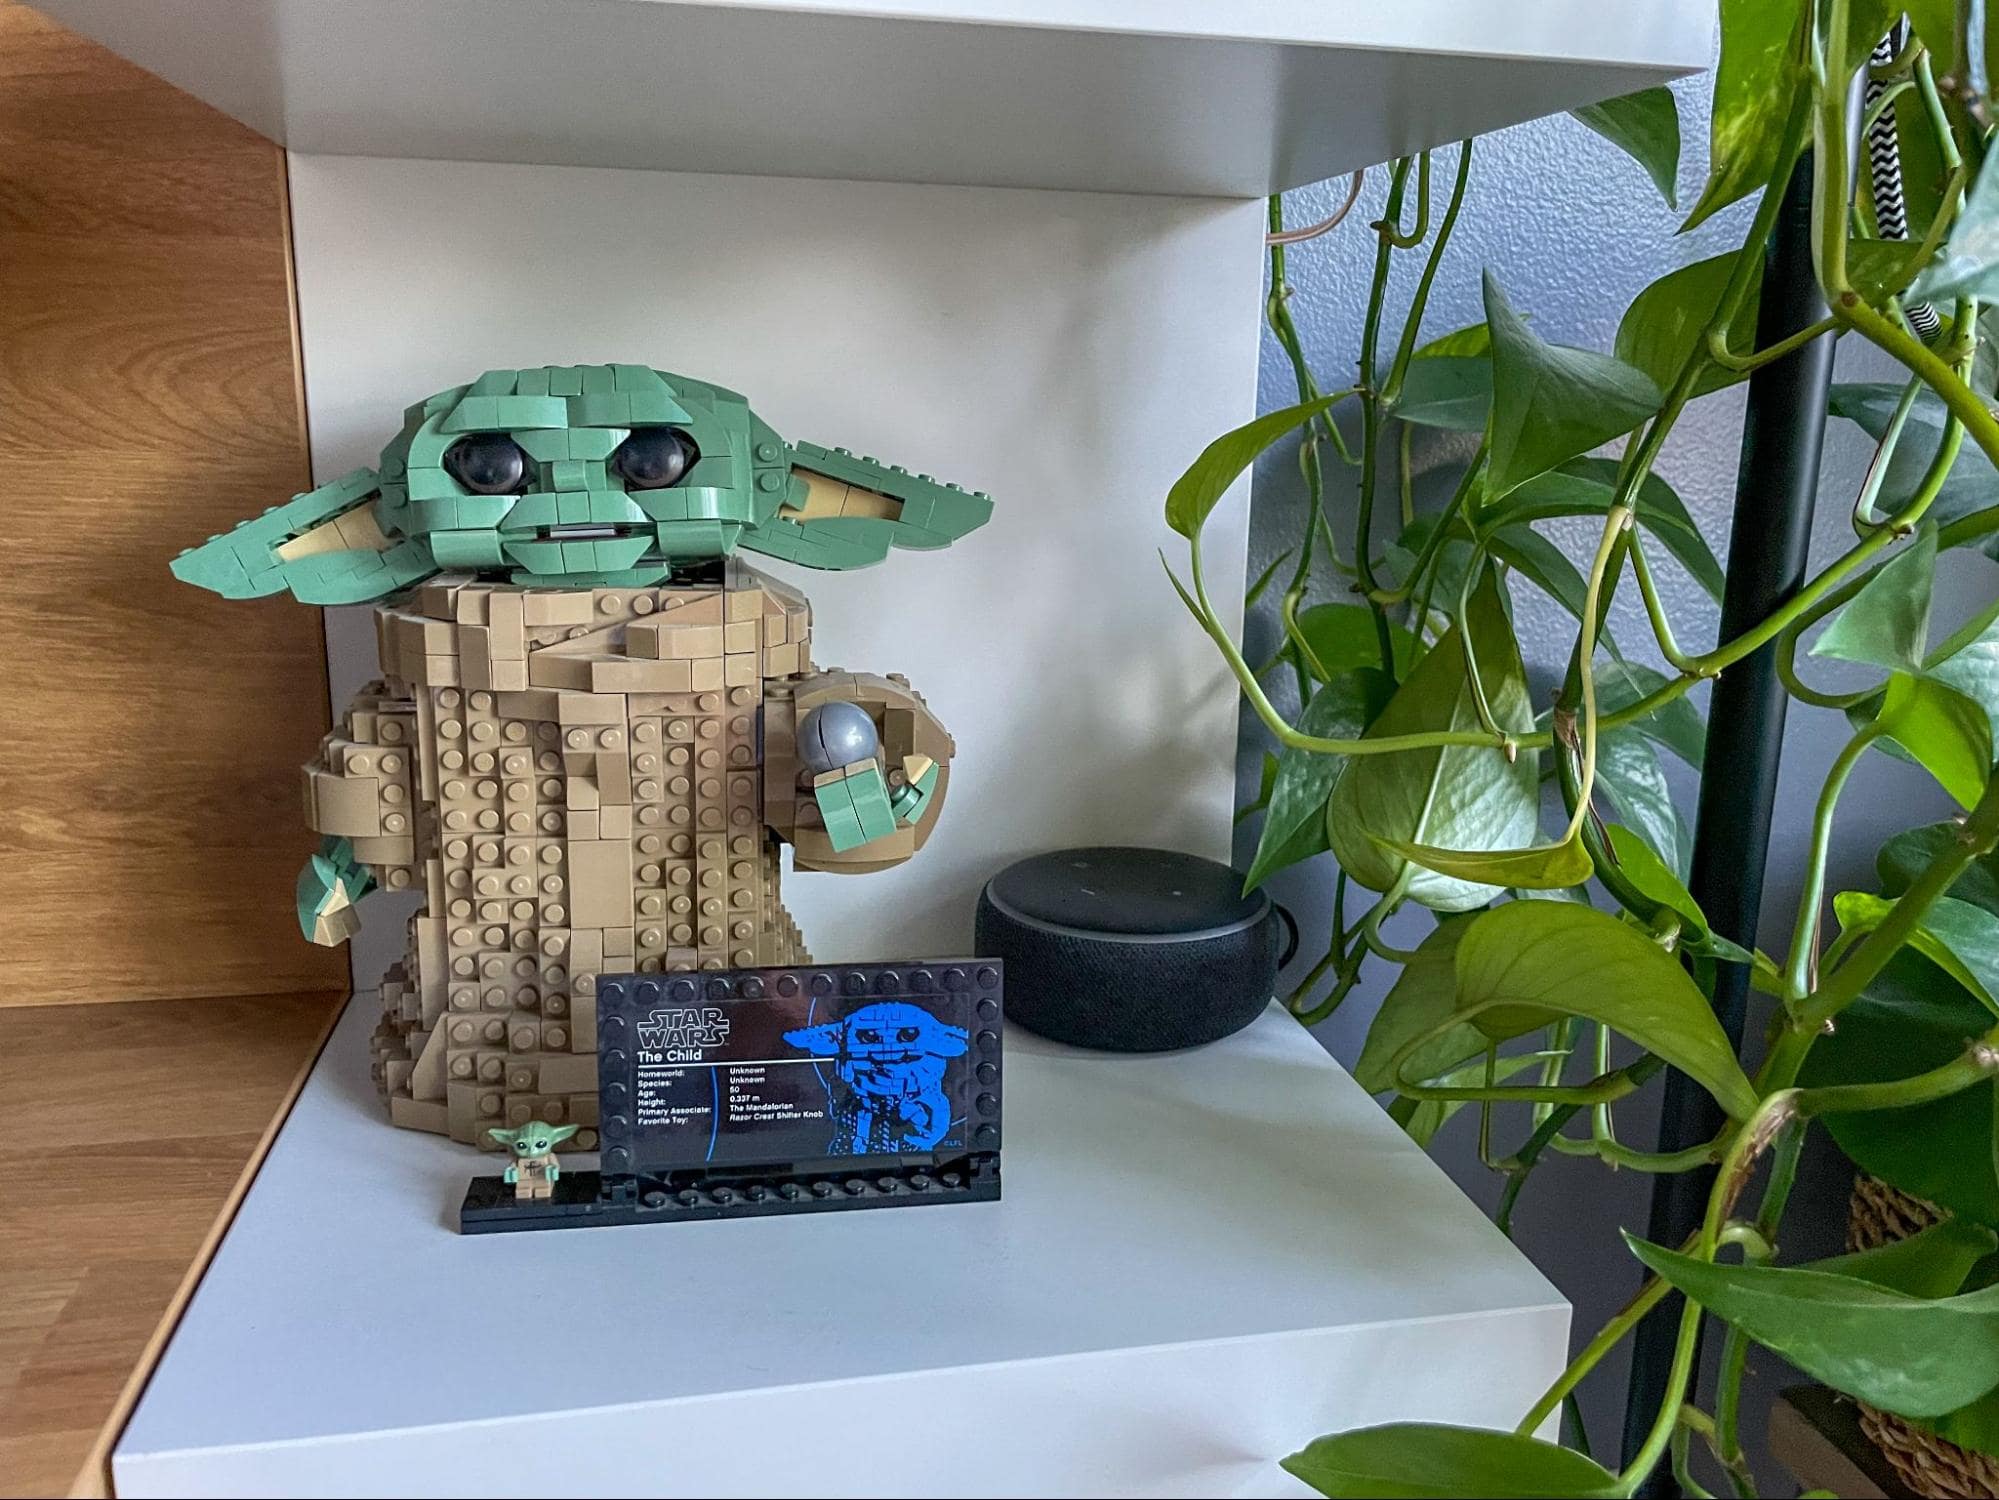 A model of Yoda, a popular green science fiction character made from building blocks on a shelf, accompanied by a small replica and a smart speaker, beside a hanging indoor plant